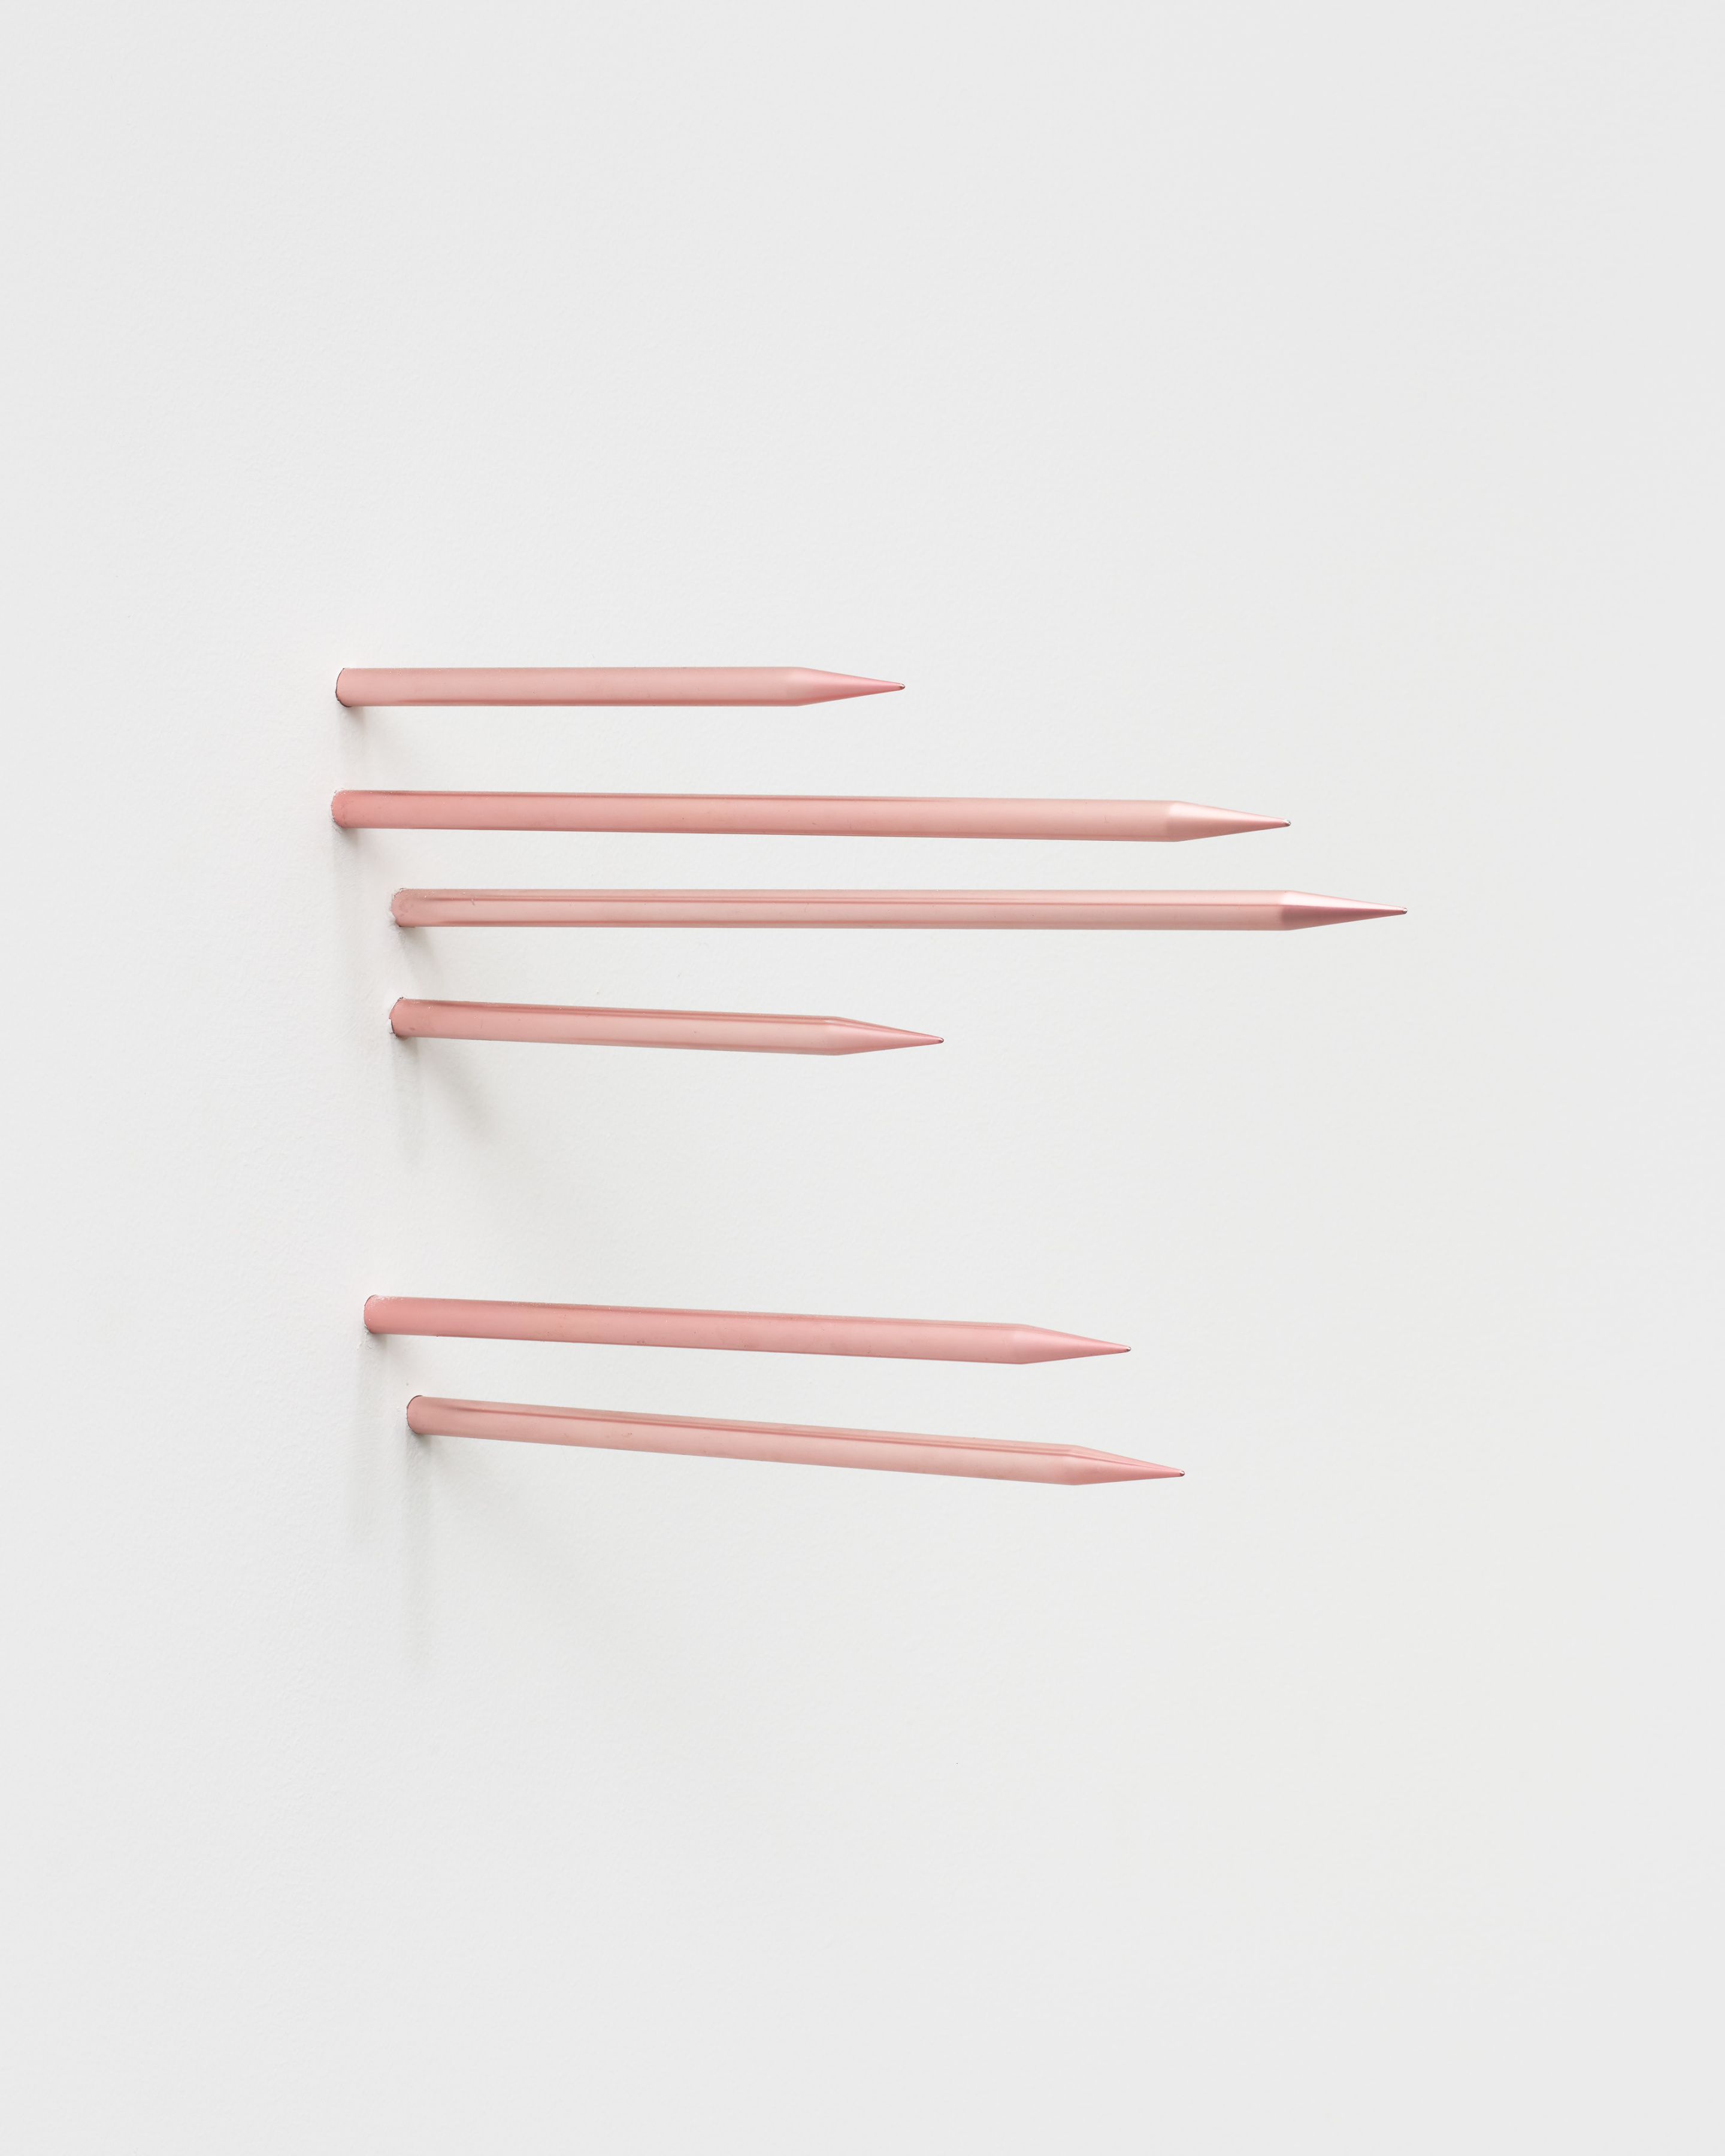 Six thin pink metal spikes emerge from the gallery wall. 